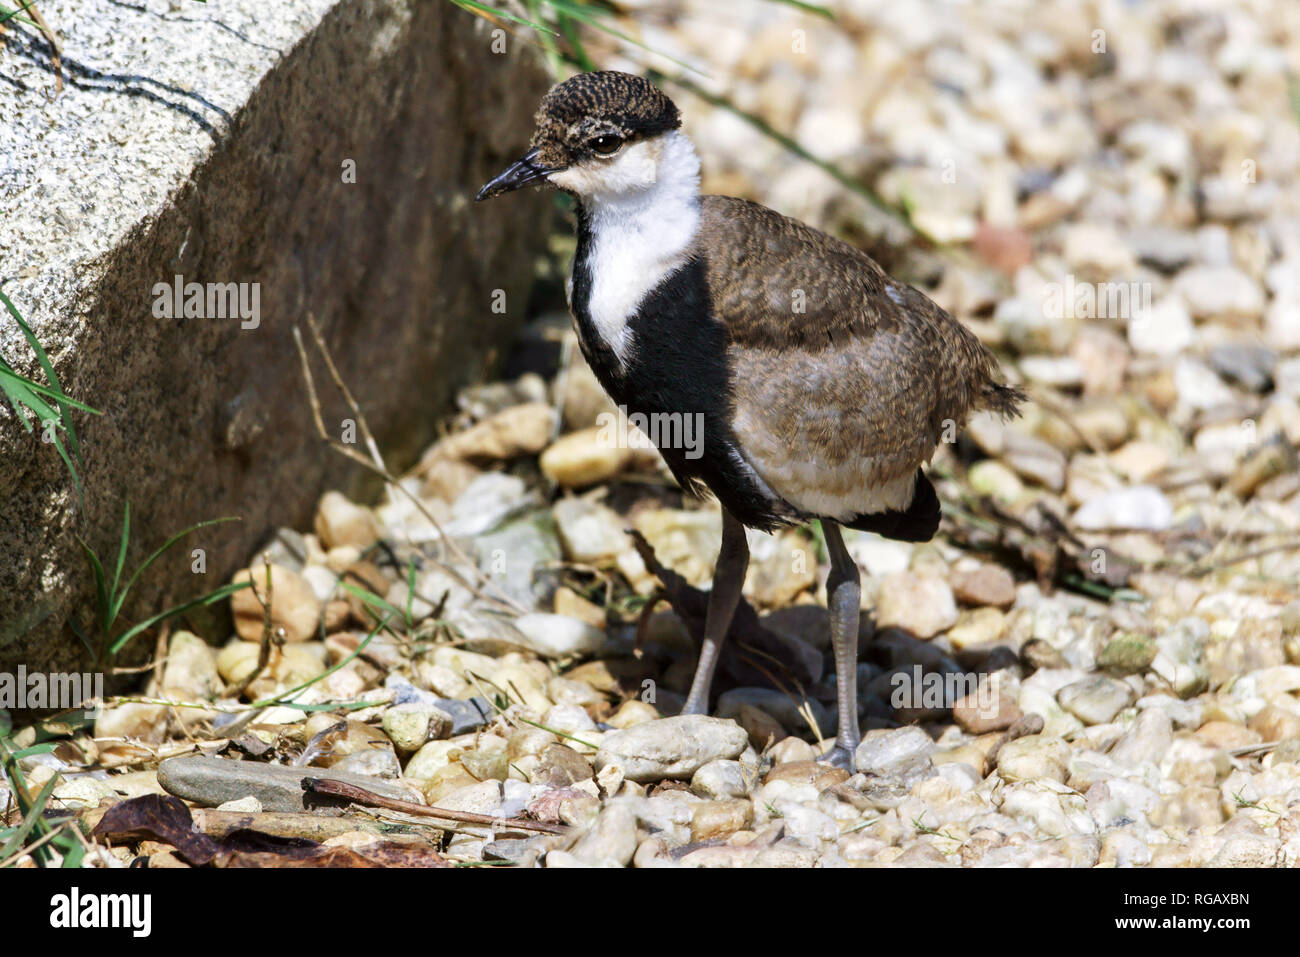 Spur-winged Plover  (Hoplopterus spinosus).Juvenile at 23 days old. Stock Photo